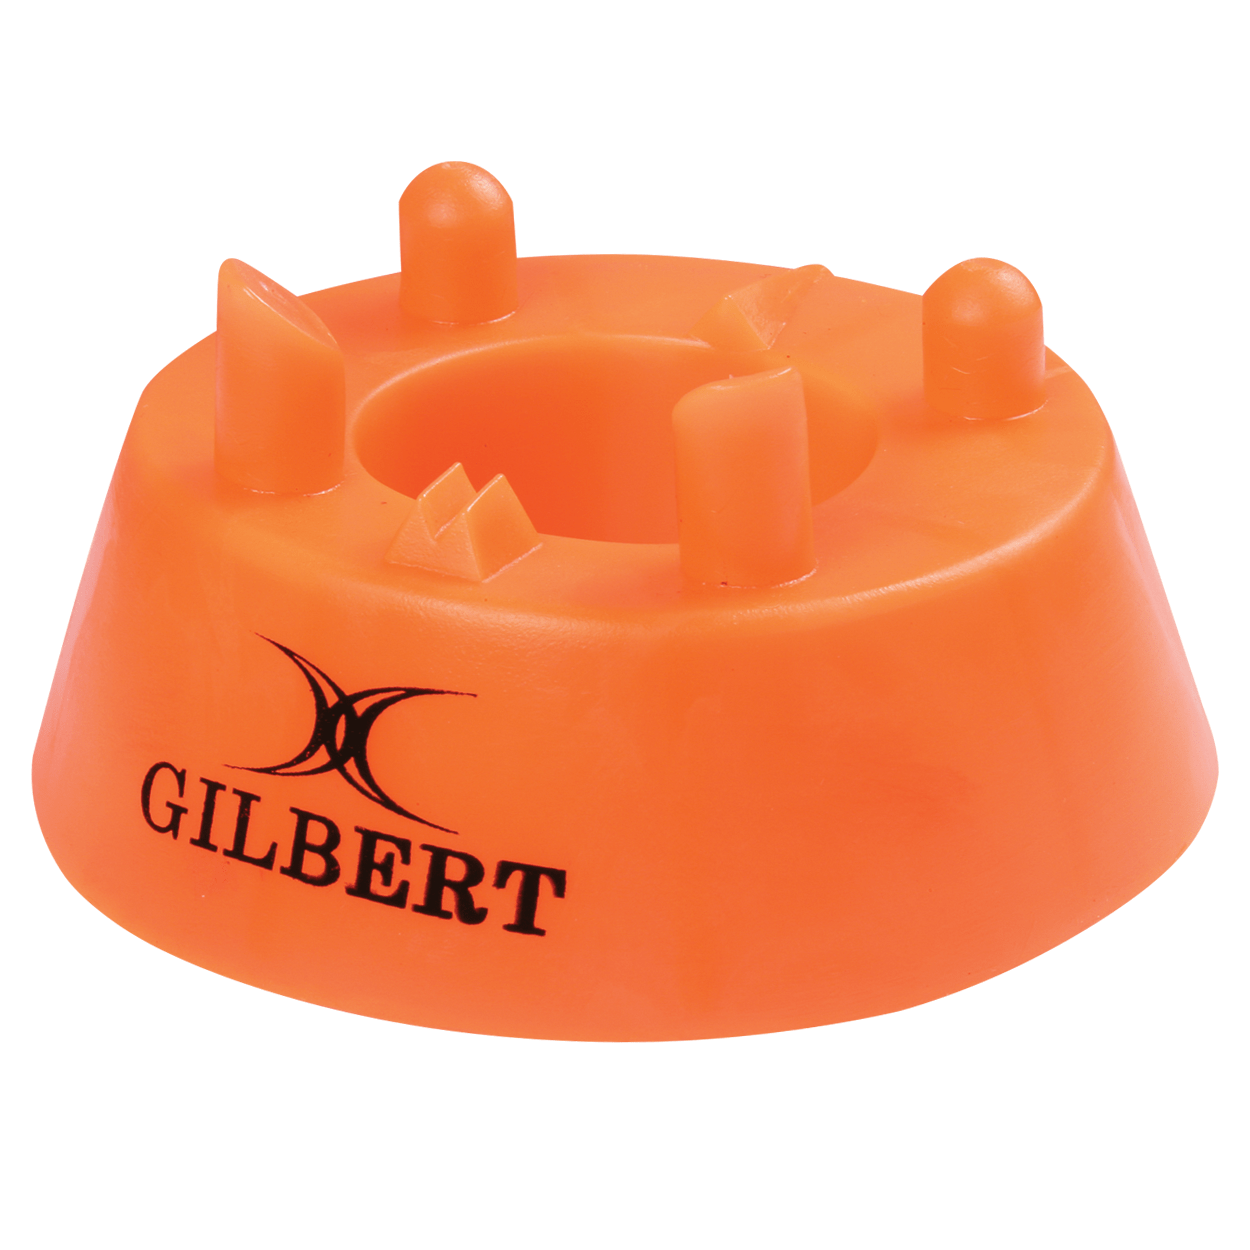 Rugby Imports Gilbert 450 Precision High Rugby Kicking Tee